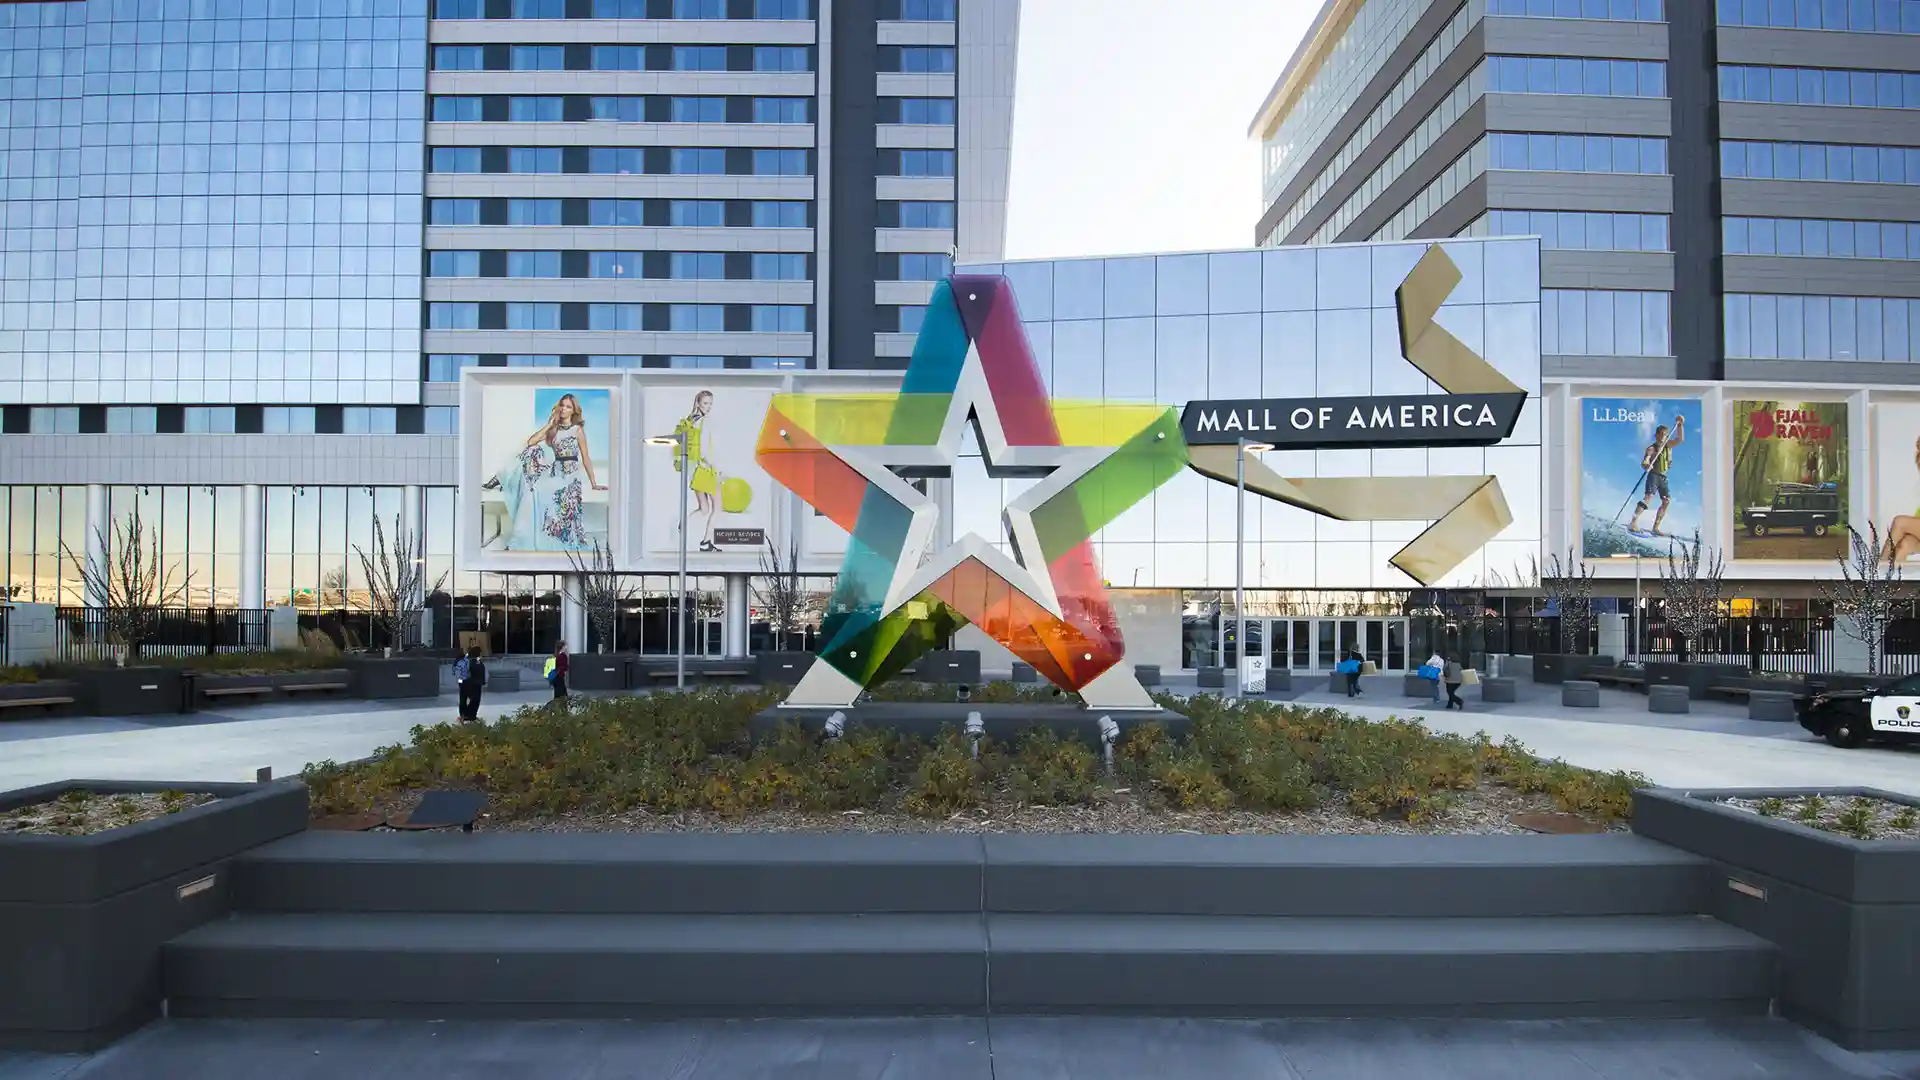 Photo of the welcome sign to Mall of America in Bloomington, Minnesota.